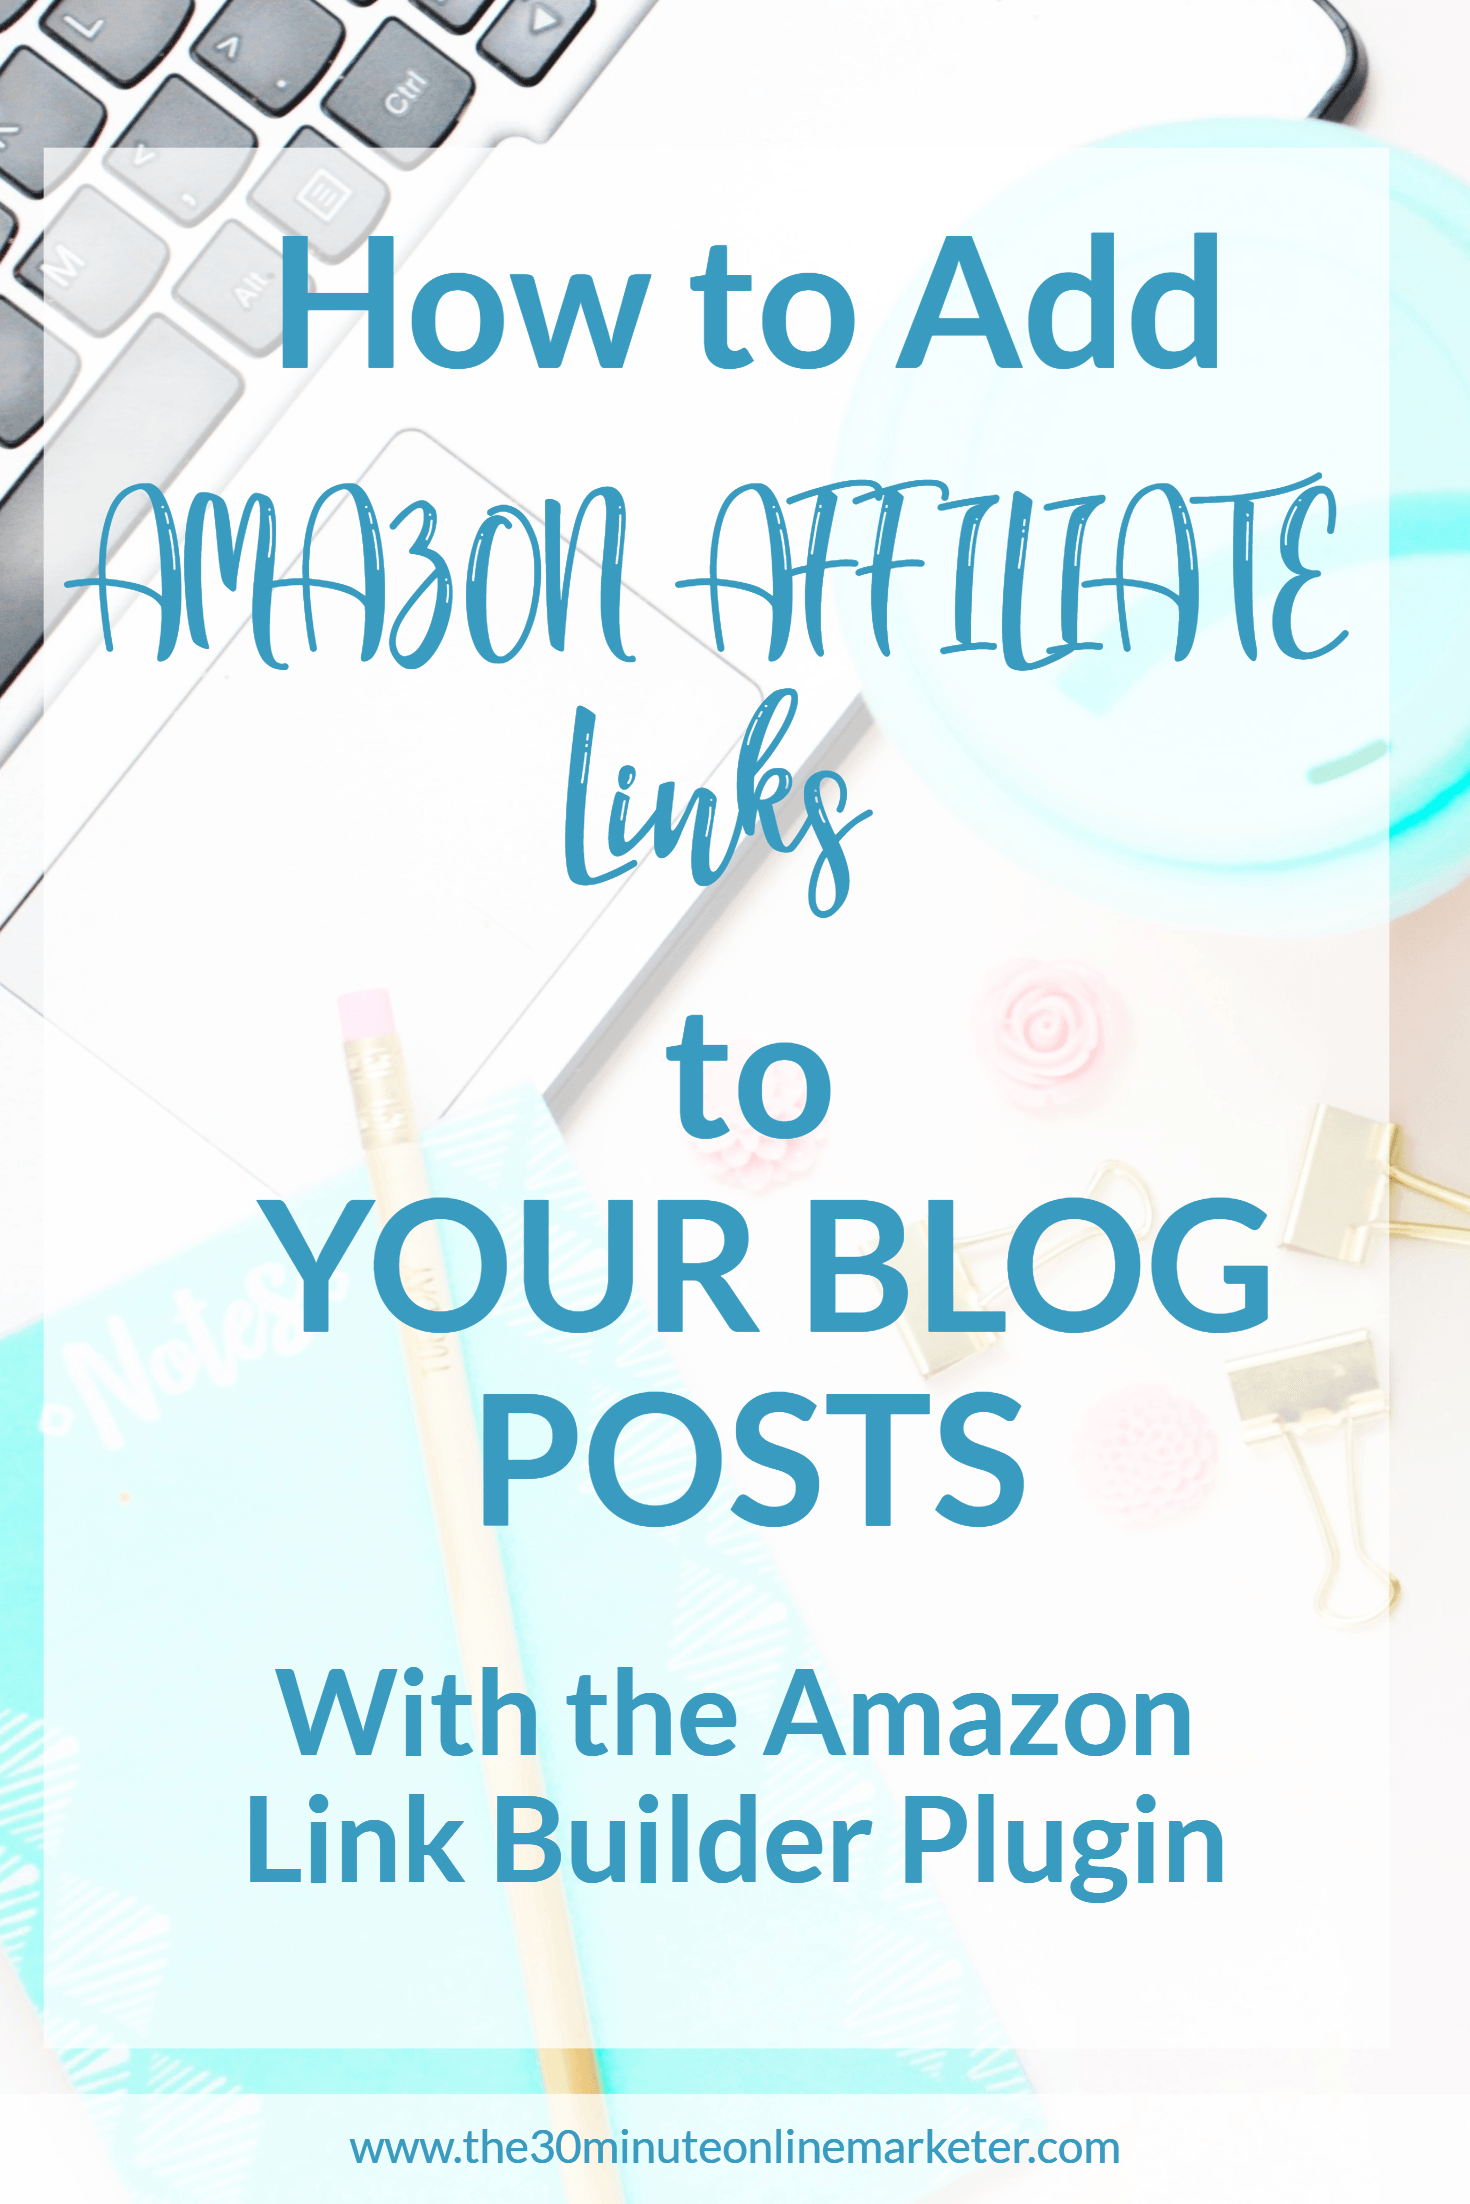 How to add Amazon affiliate links to your blog posts with the Amazon Link Builder Plugin